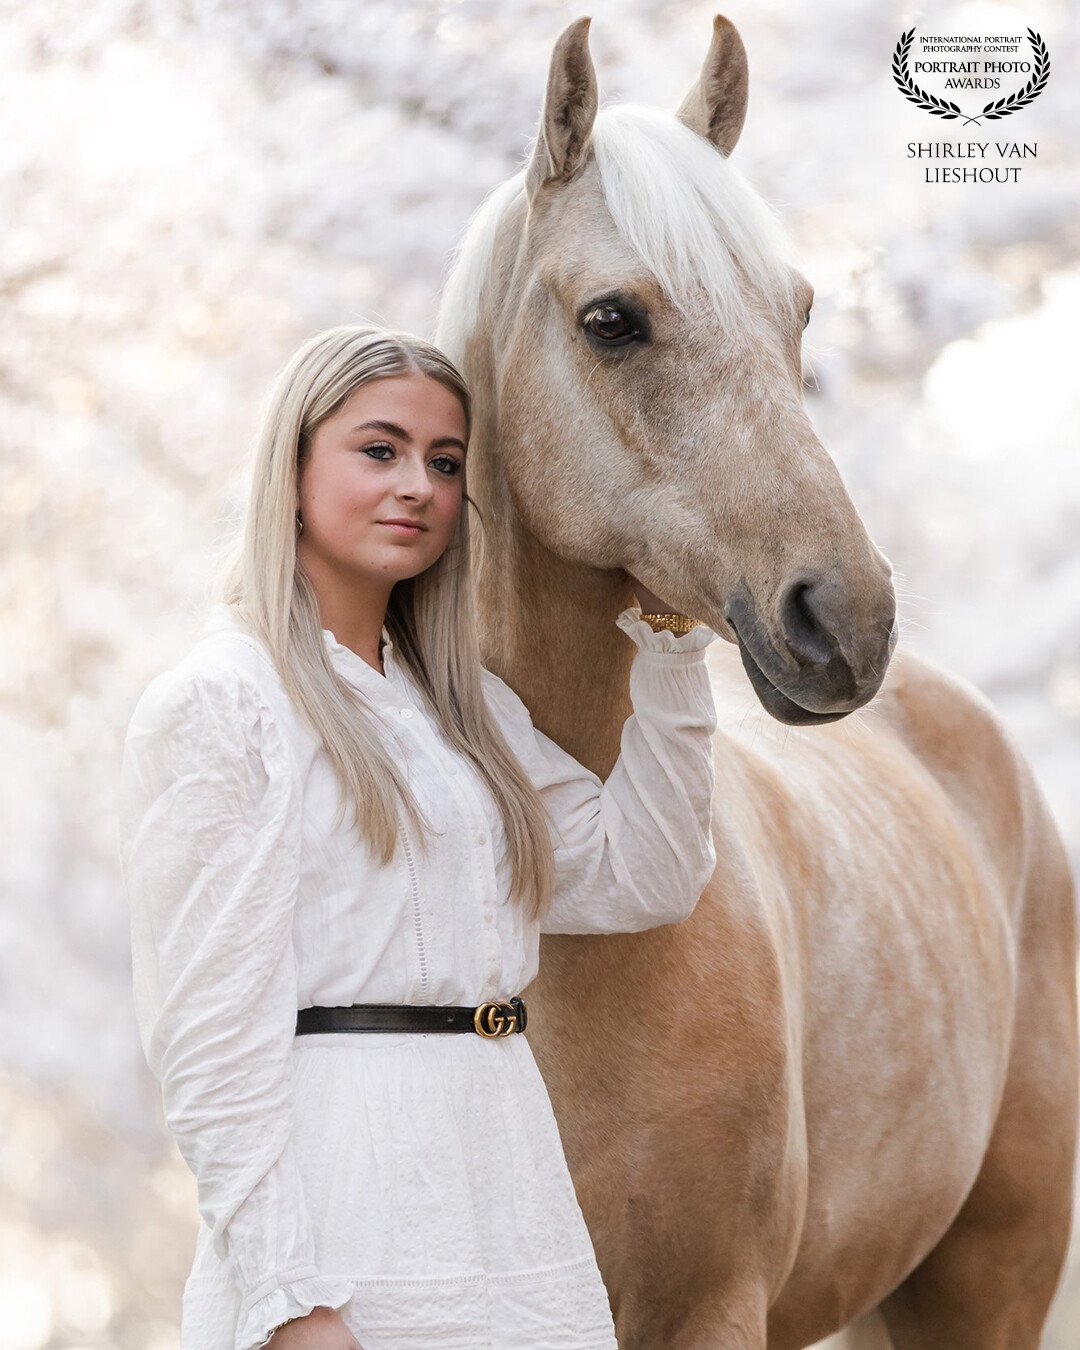 Romee with her lovely Palomino horse Royal posing in front of the beautiful blossoming trees.